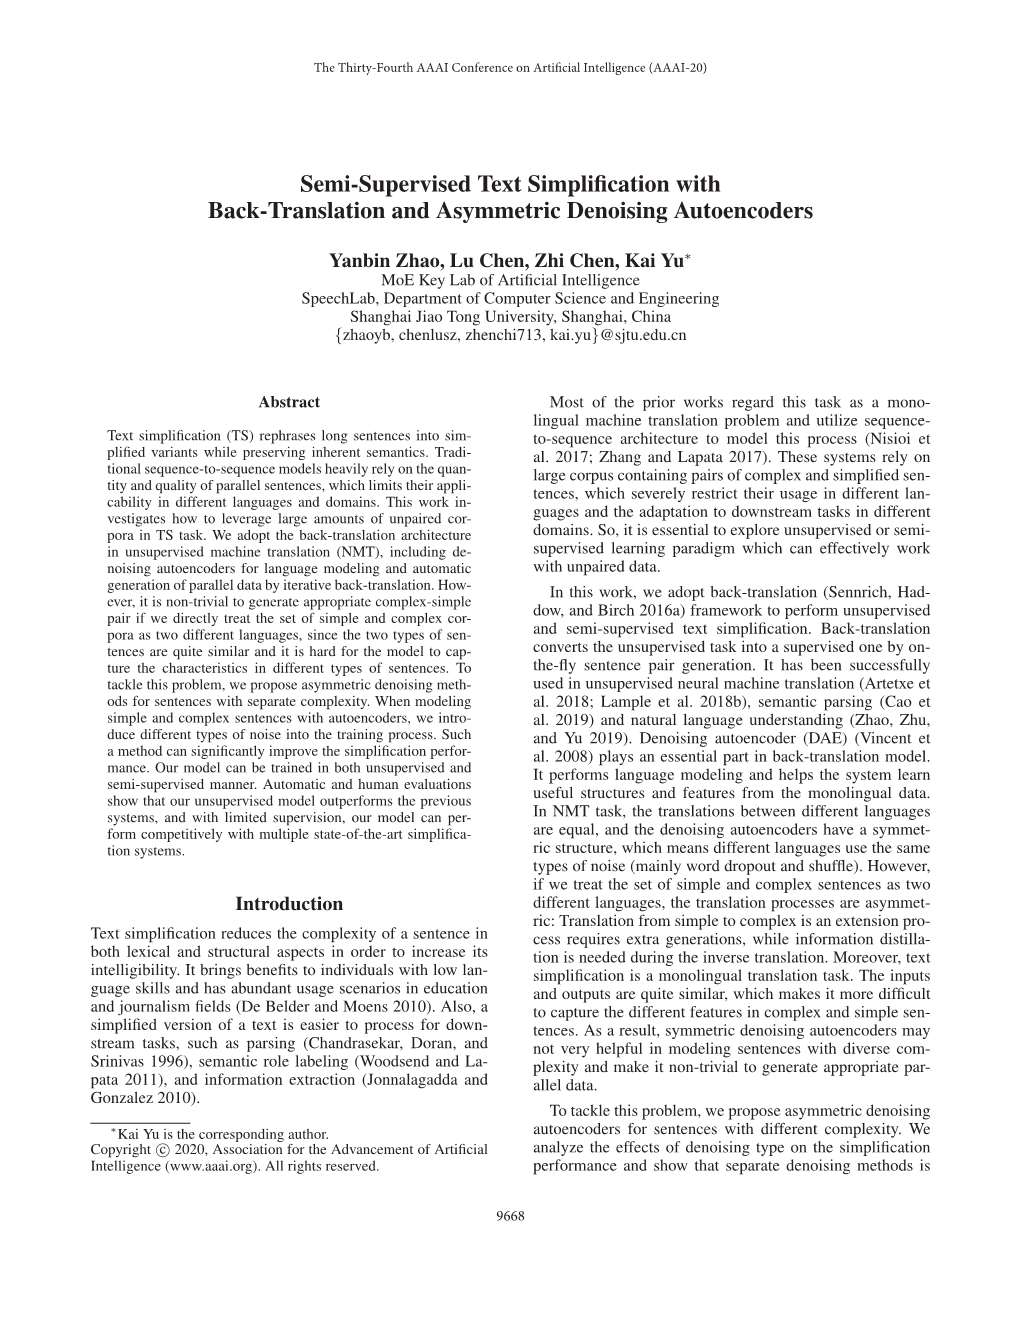 Semi-Supervised Text Simplification with Back-Translation And